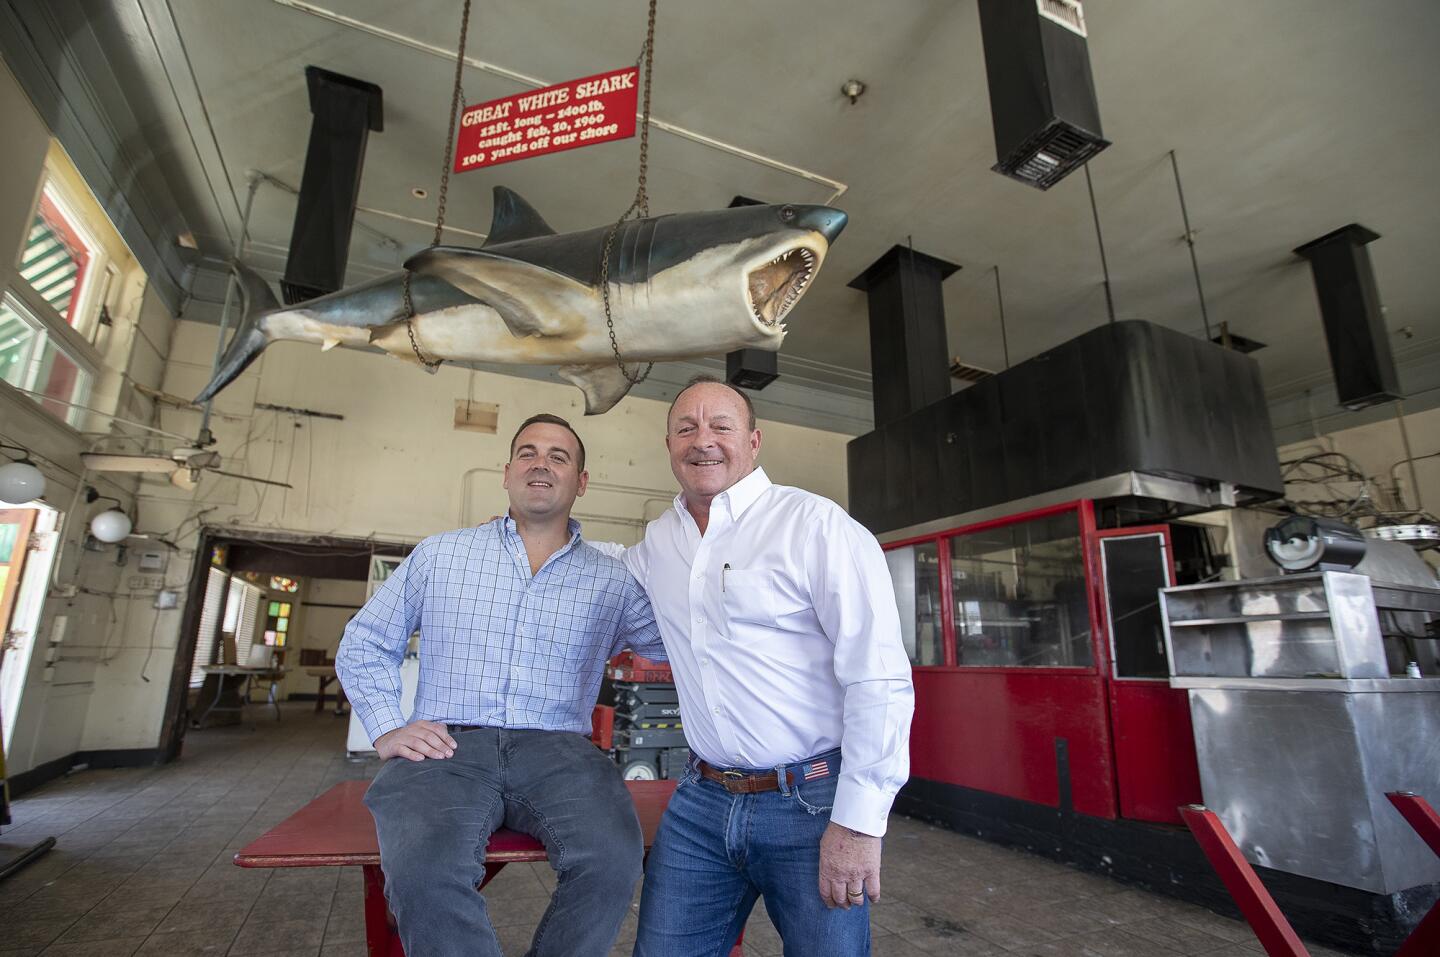 Jimmy Wasko and his father, Jim, pose under a preserved great white shark at the Crab Cooker, their Newport Beach restaurant that will be torn down and rebuilt. The shark was caught in Newport in 1960, according to the sign dangling above it.